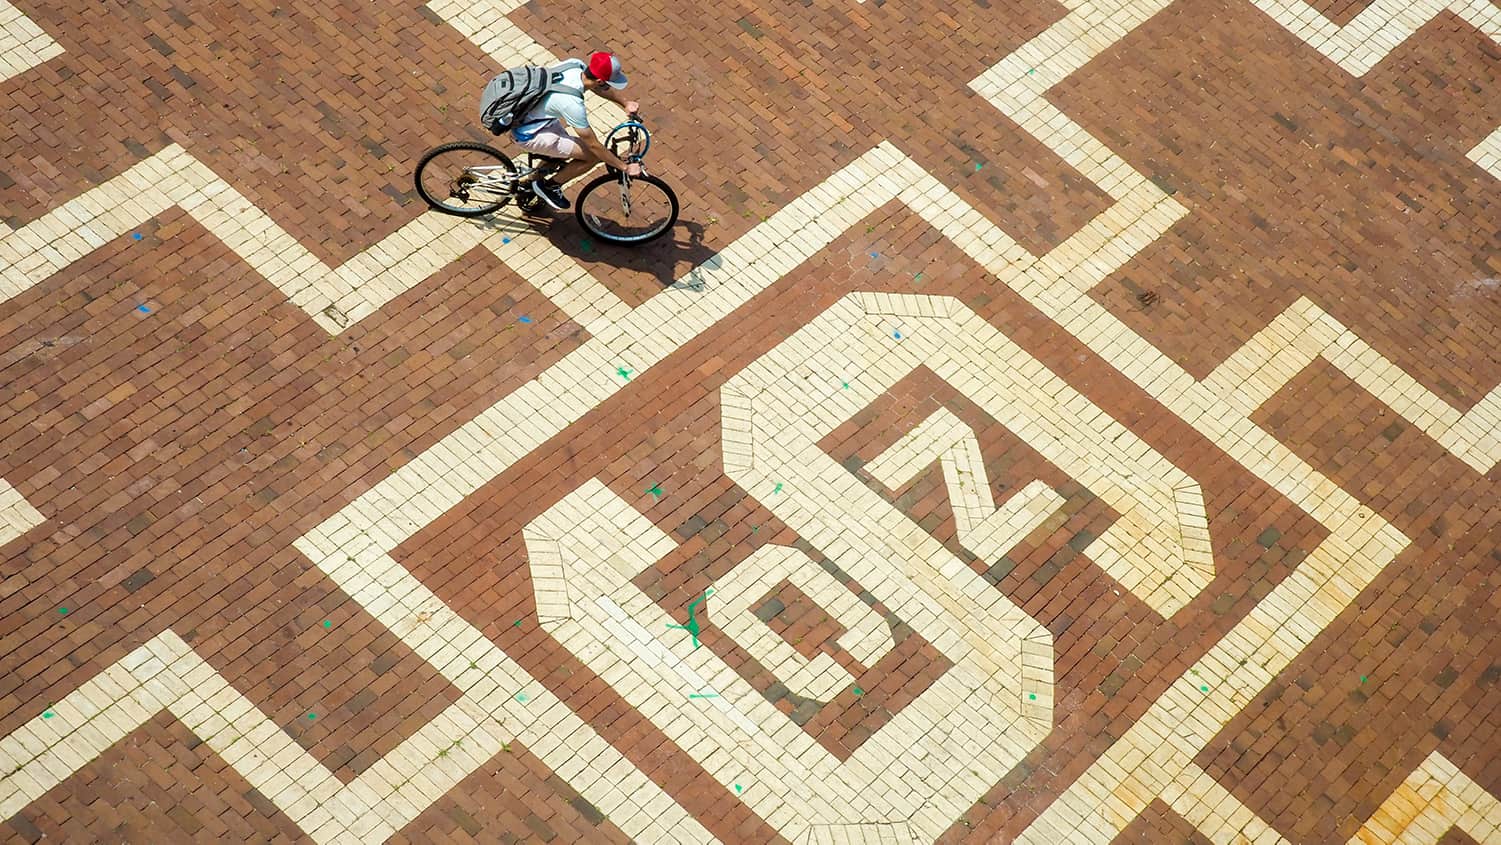 An overhead view of a student riding a bike across the patterned Brickyard.